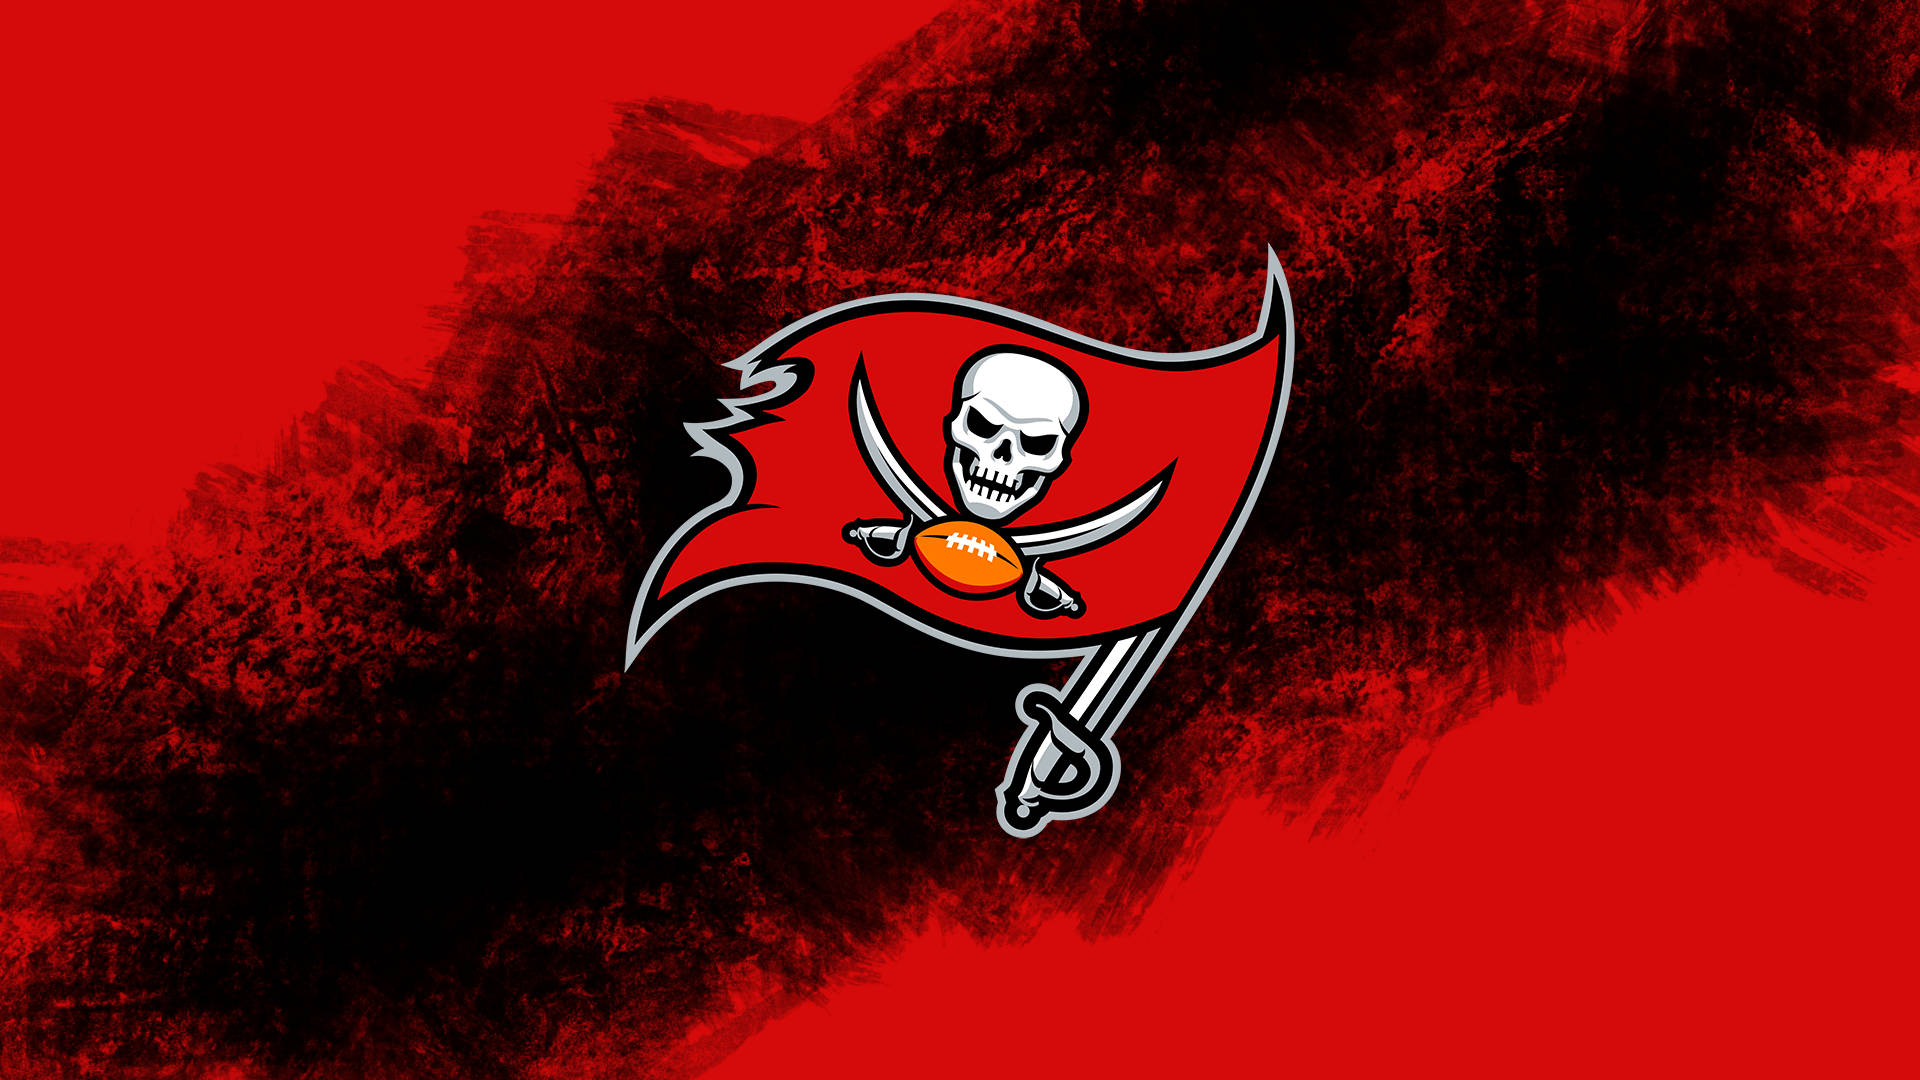 Nfl Red Pirate Flag Background